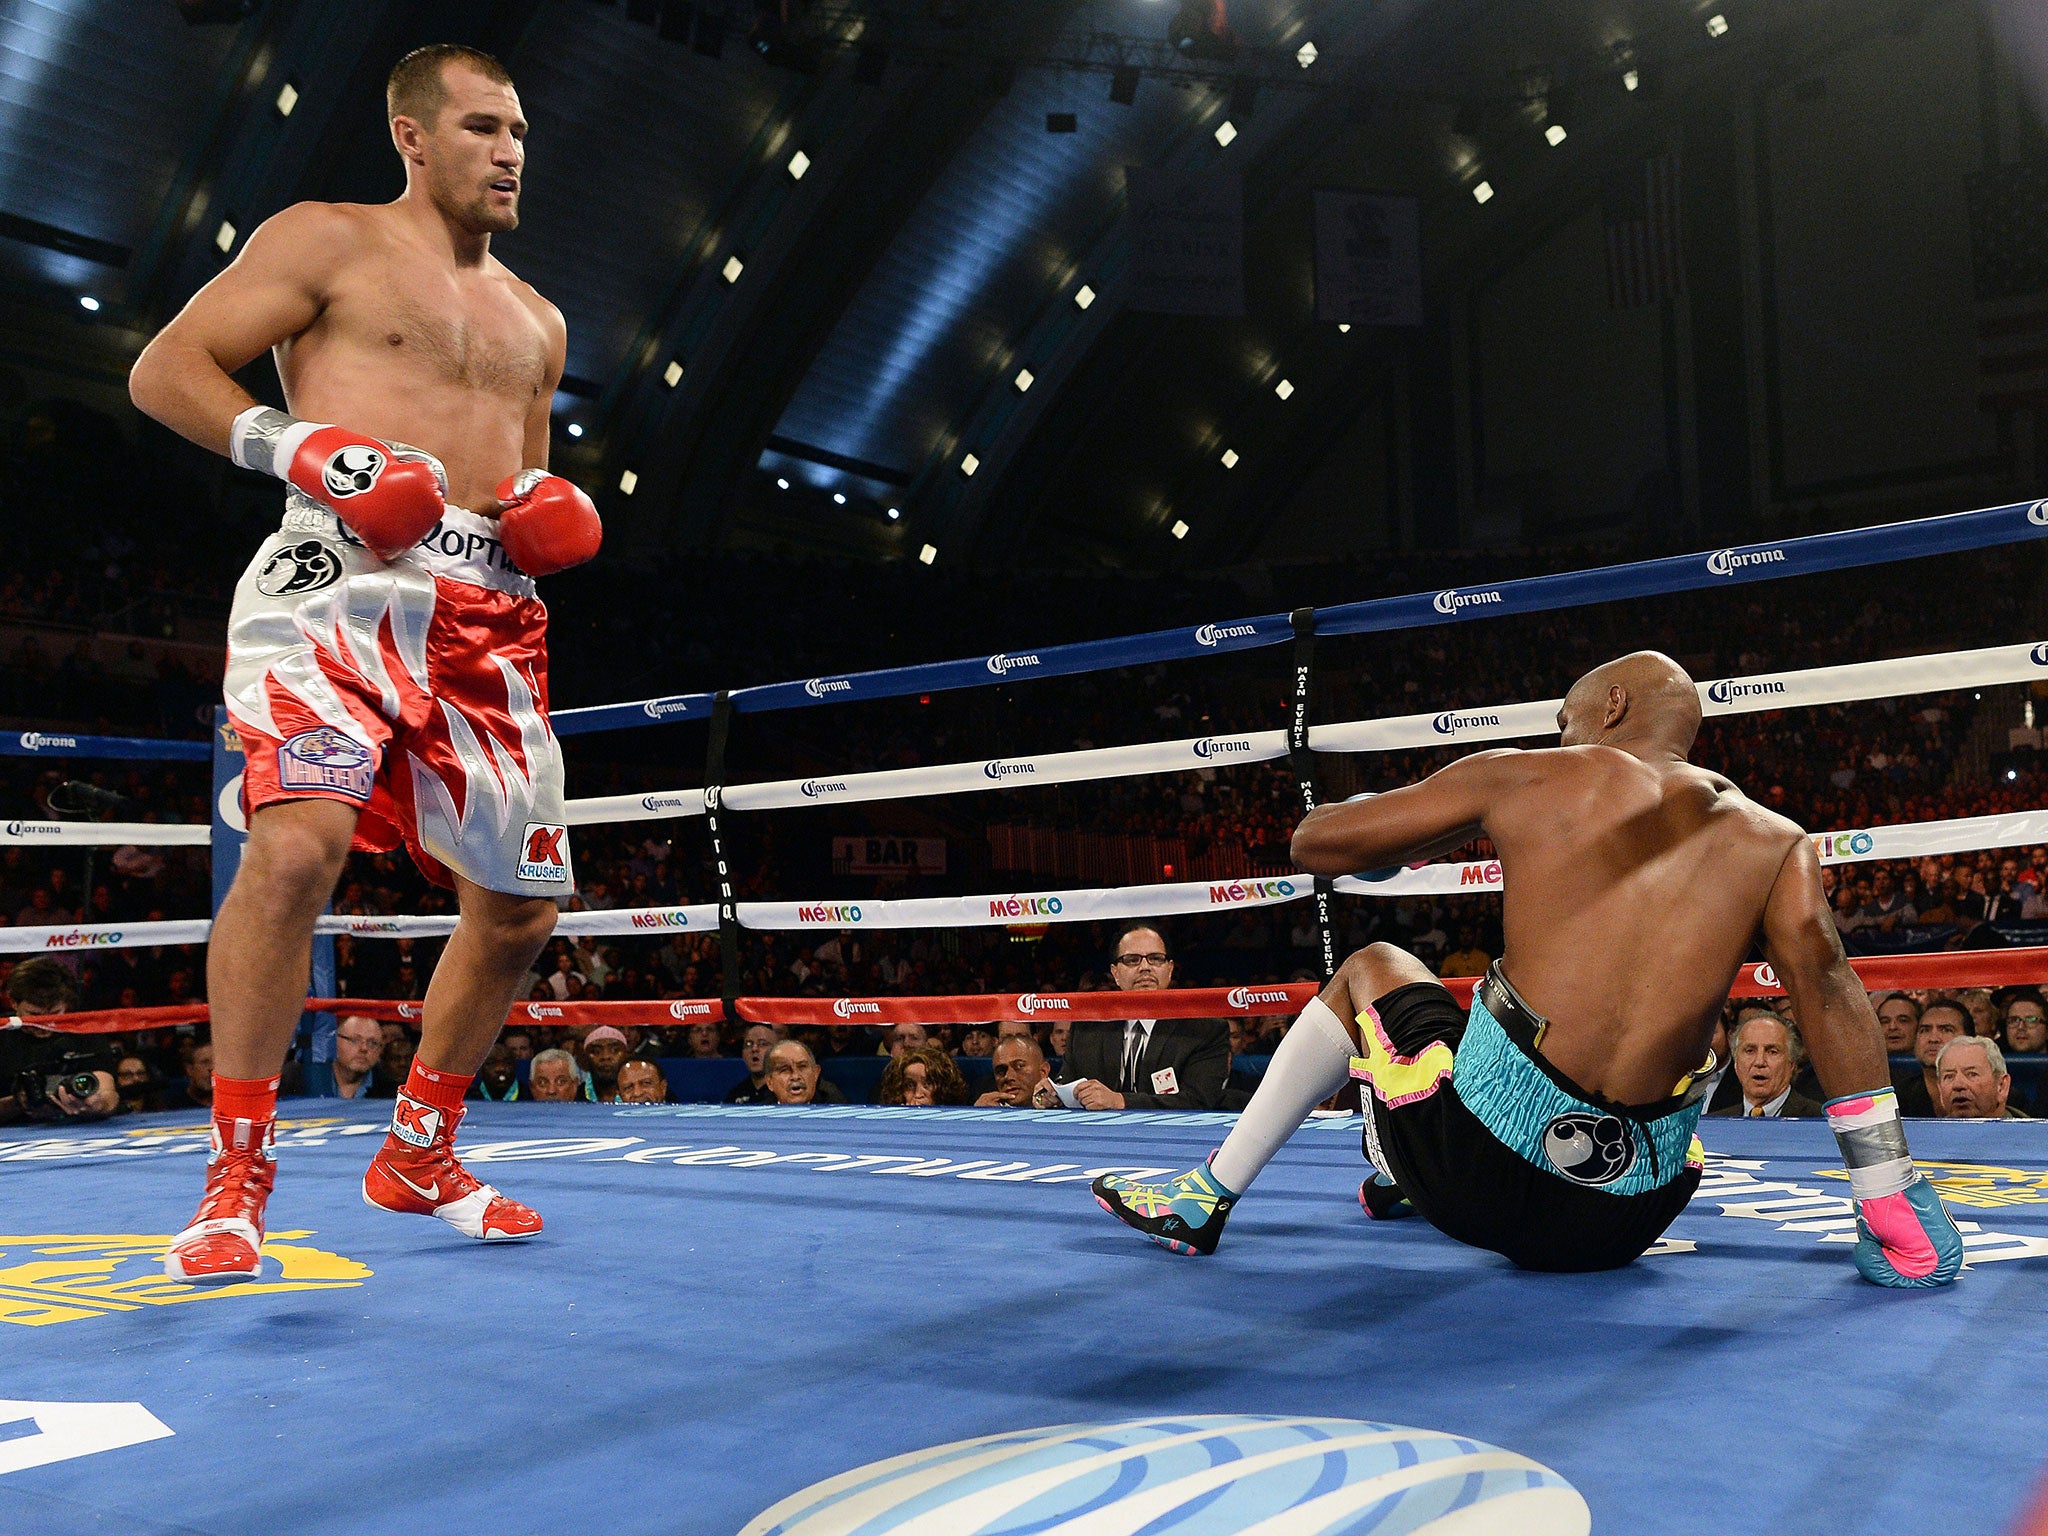 Kovalev floors Hopkins in the first round in his win over the veteran back in November